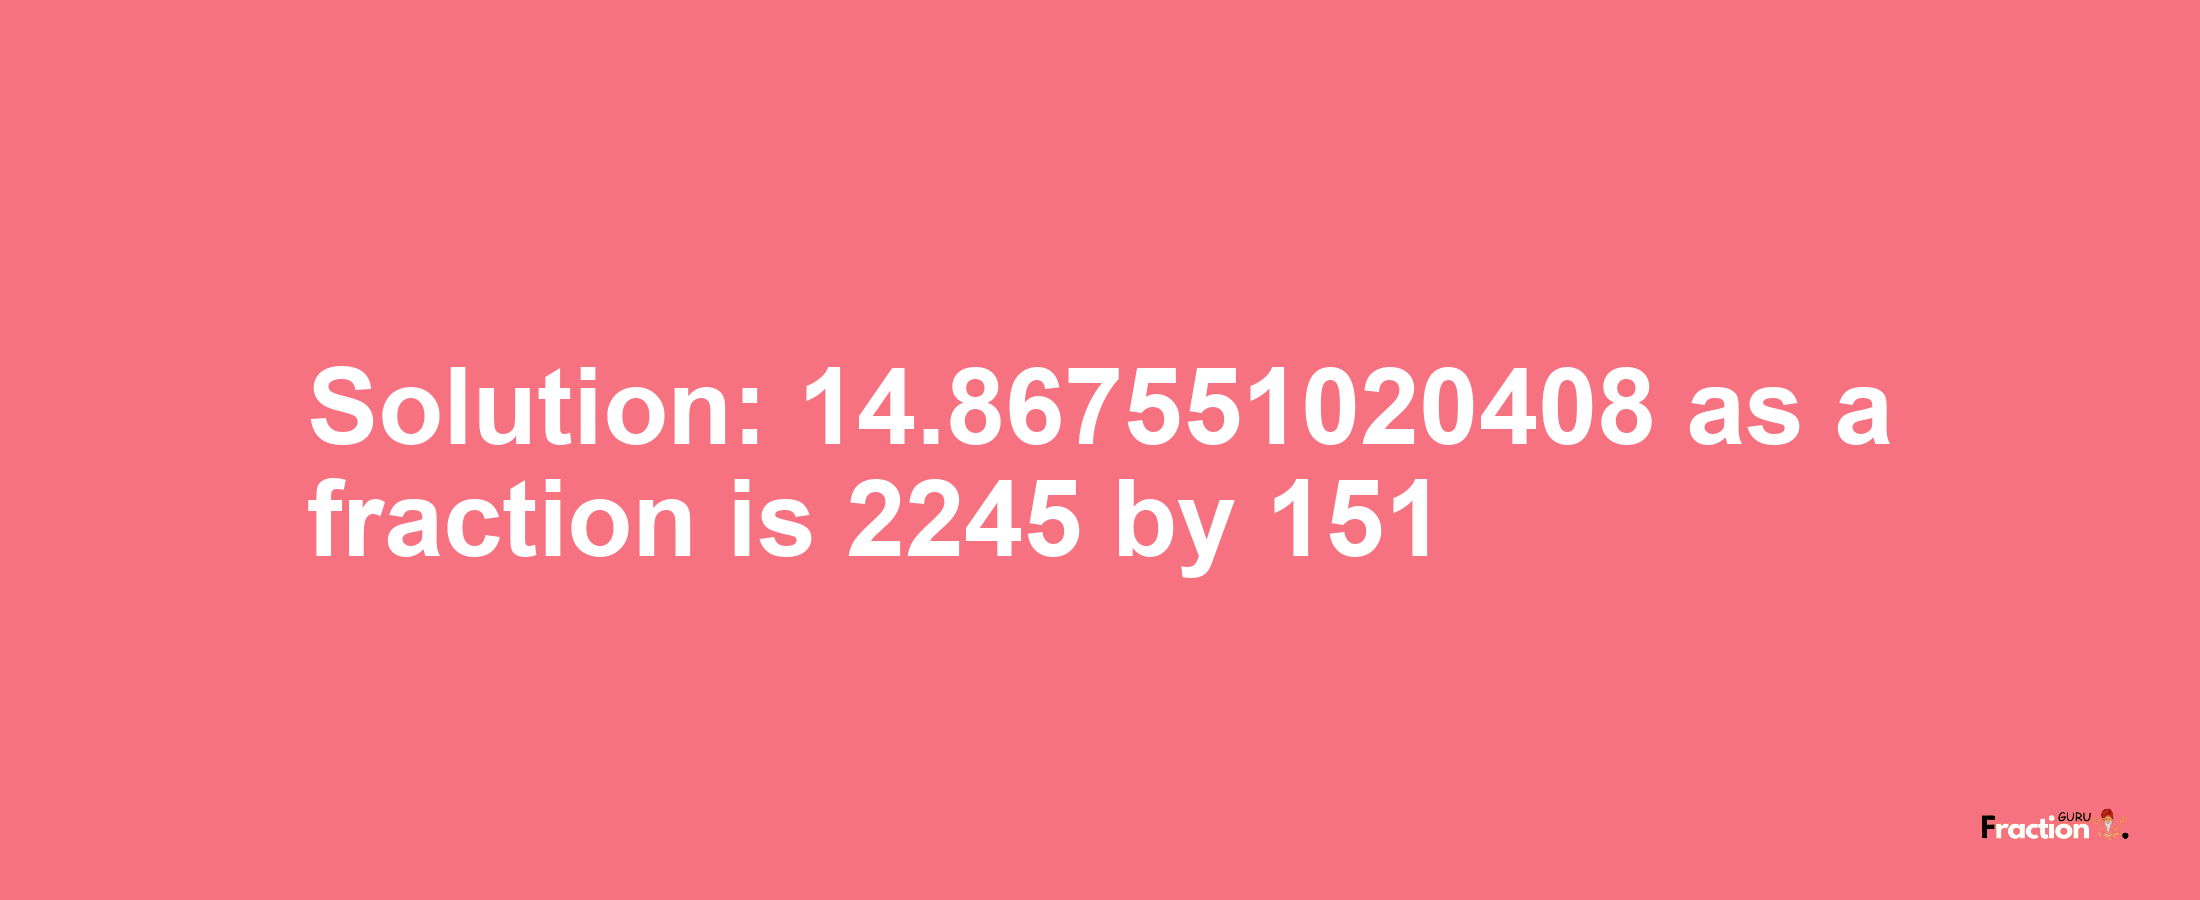 Solution:14.867551020408 as a fraction is 2245/151